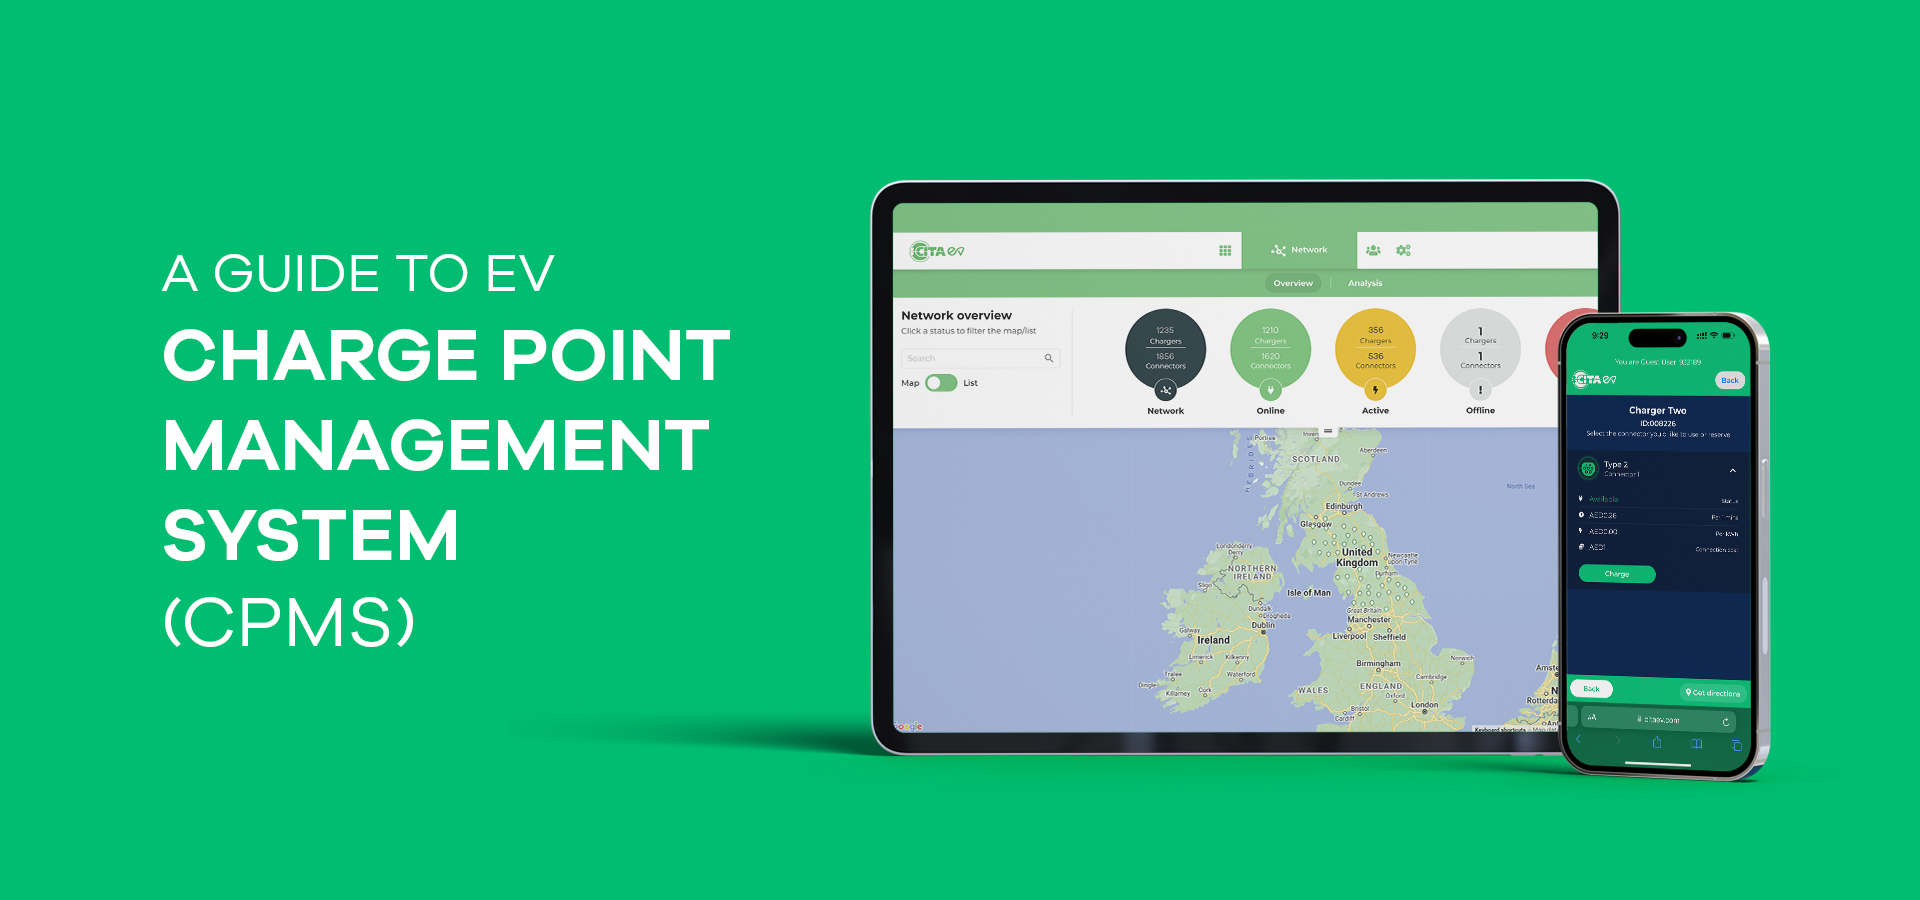 Charge Point Management System (CPMS)